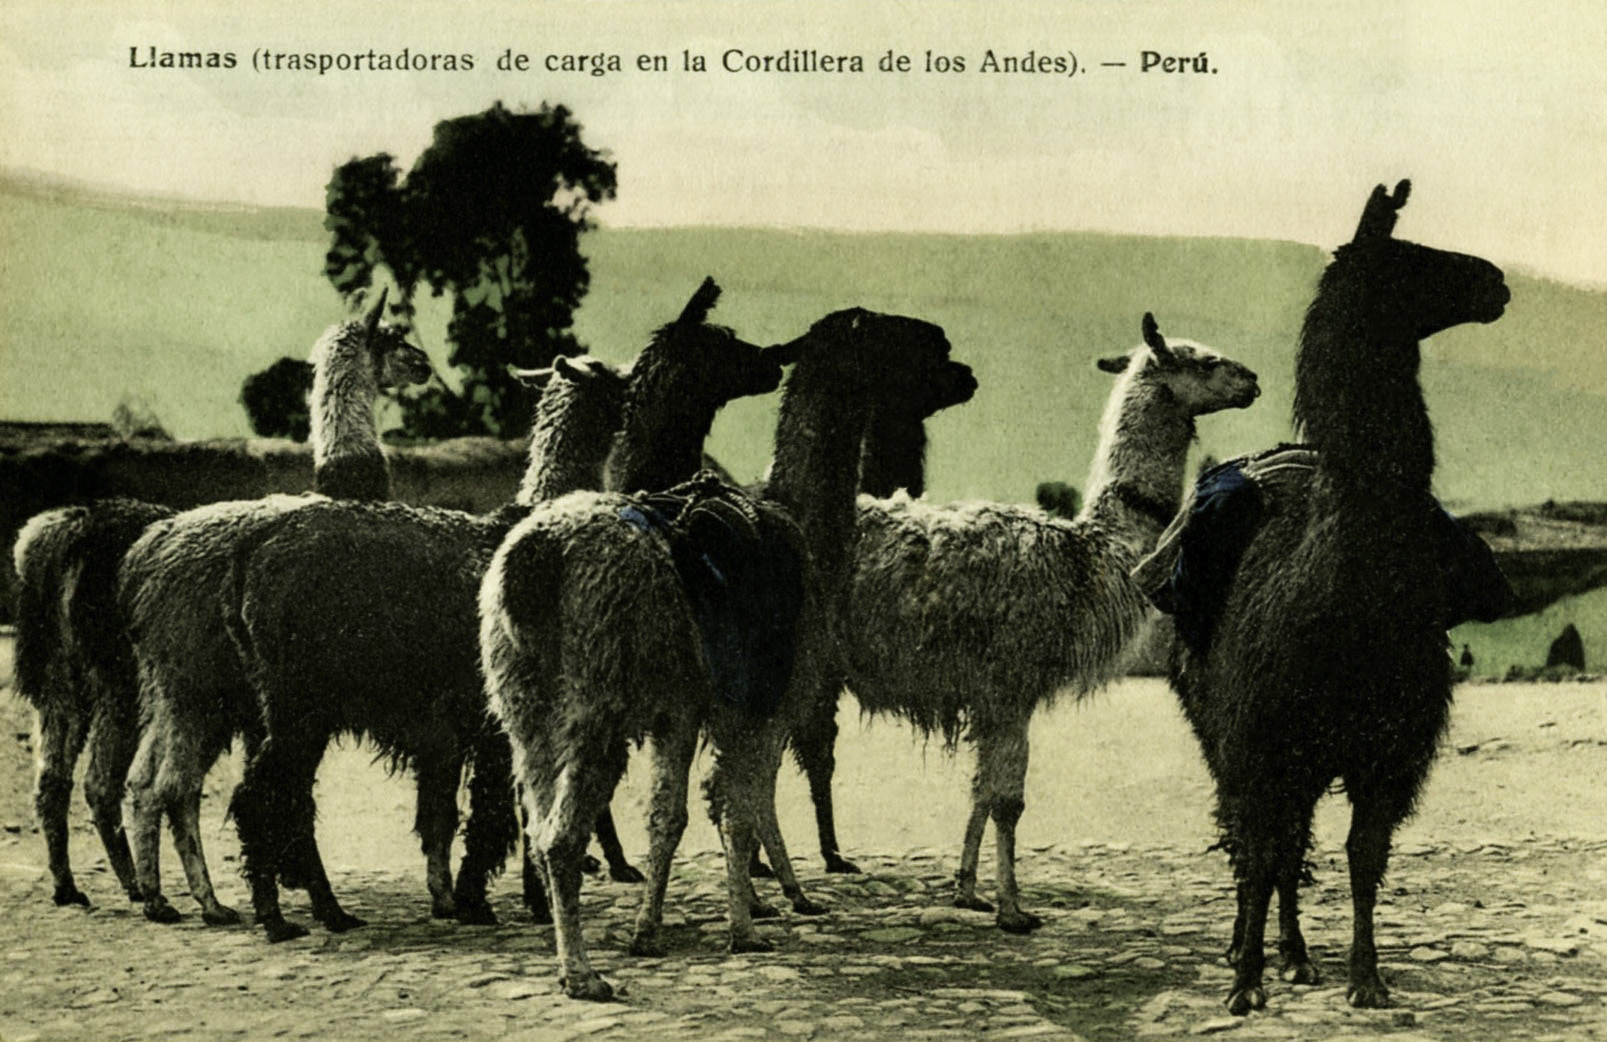 South American Postcard Collection